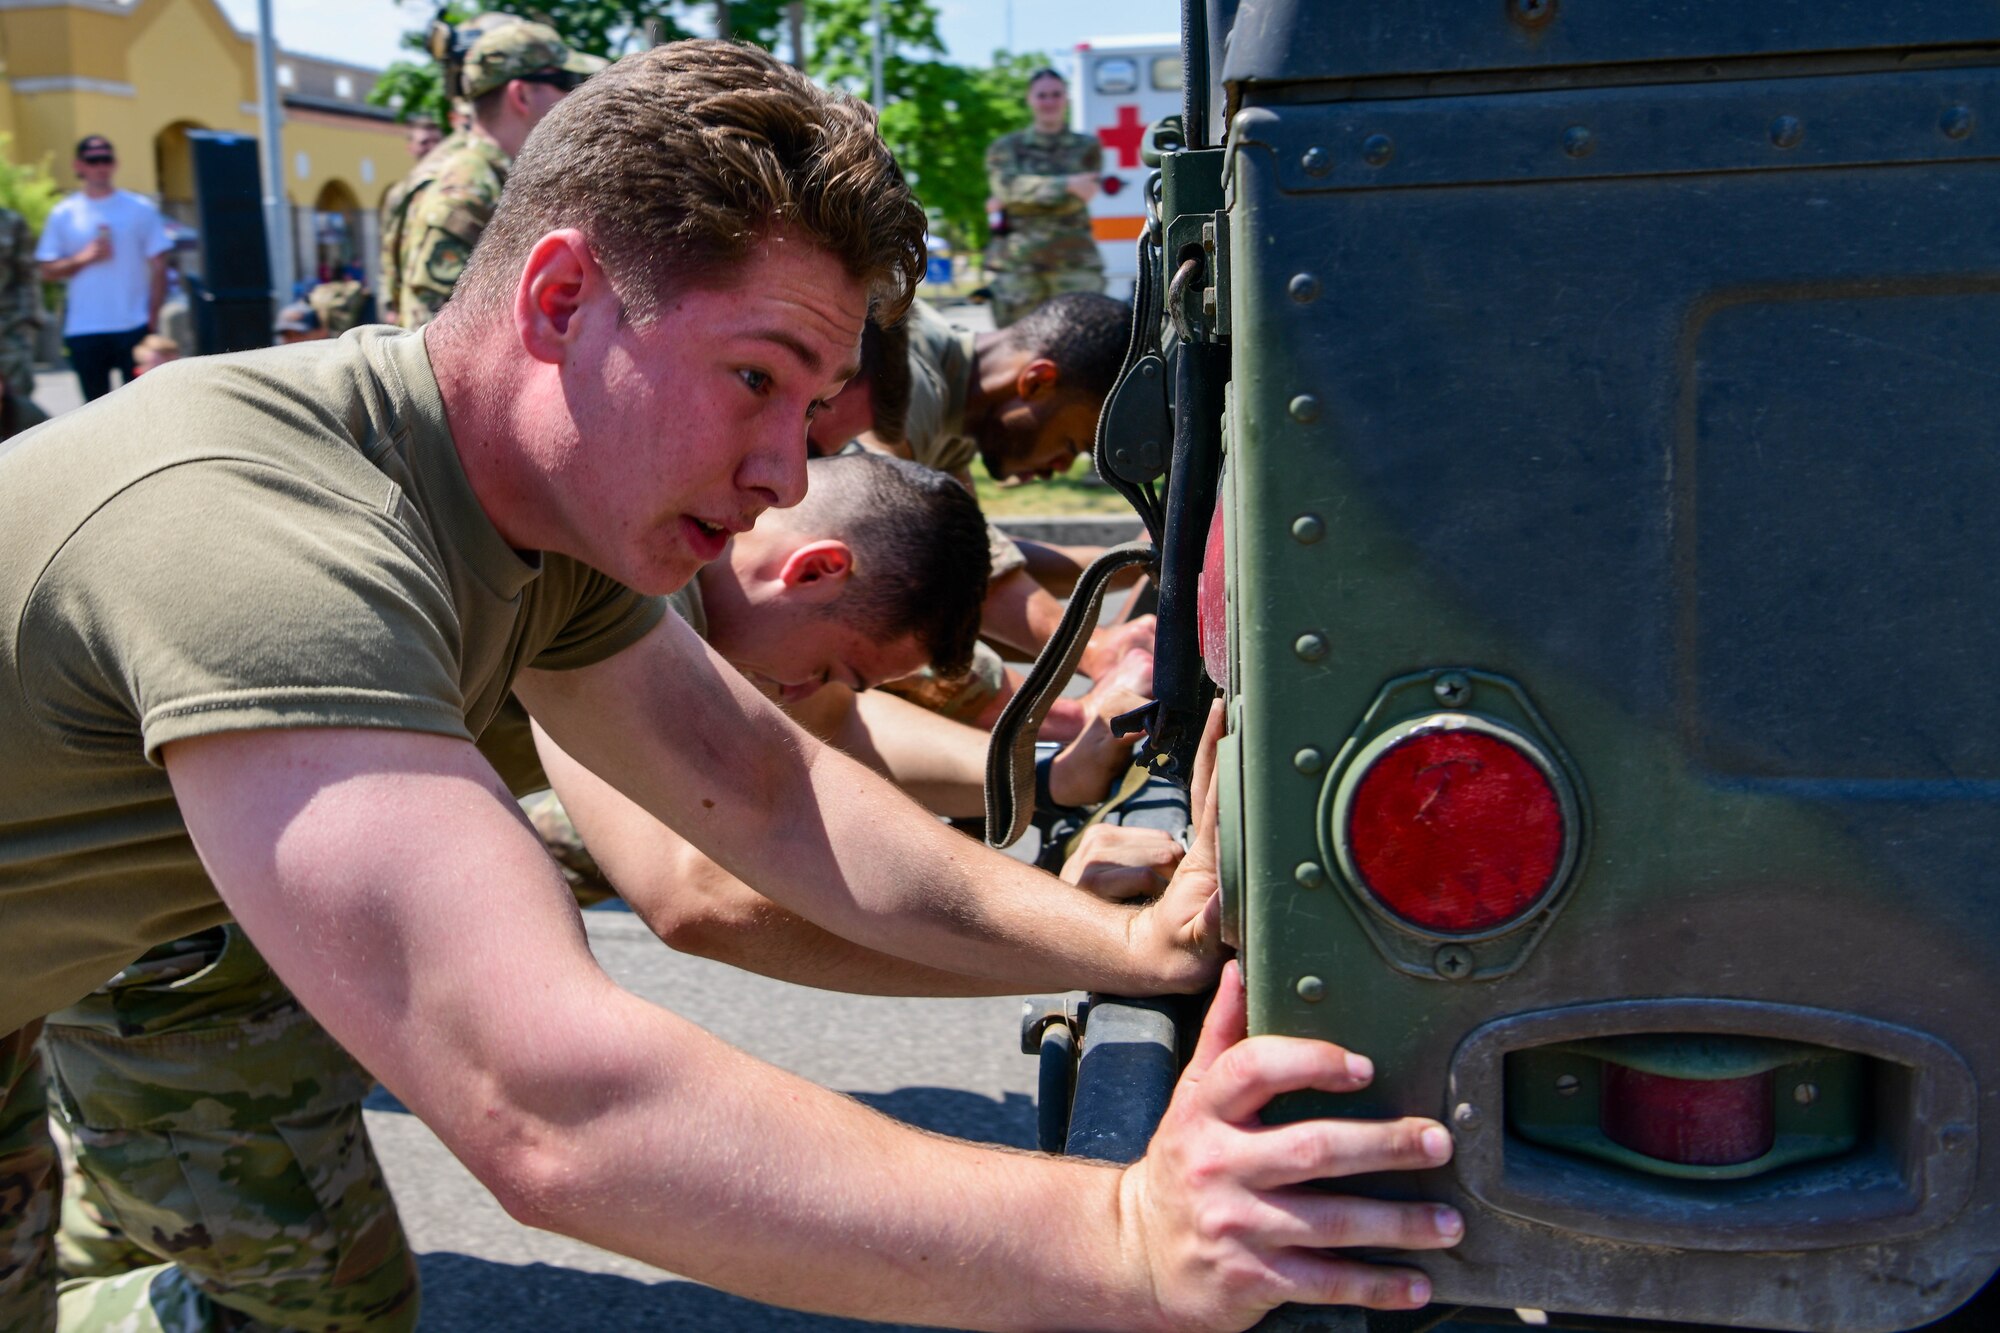 A U.S. Air Force Airman assigned to the 31st Security Forces Squadron pushes a Humvee with his team during a Guns and Hoses competition at Aviano Air Base, Italy, May 18, 2022. The 31st SFS competed against the 31st Civil Engineer Squadron Fire Department in an obstacle course themed after challenges from their respective jobs. In 1962, President Kennedy declared Peace Officers Memorial Day to be observed on May 15 and recognized May 15 as National Police Week. (U.S Air Force photo by Senior Airman Brooke Moeder)